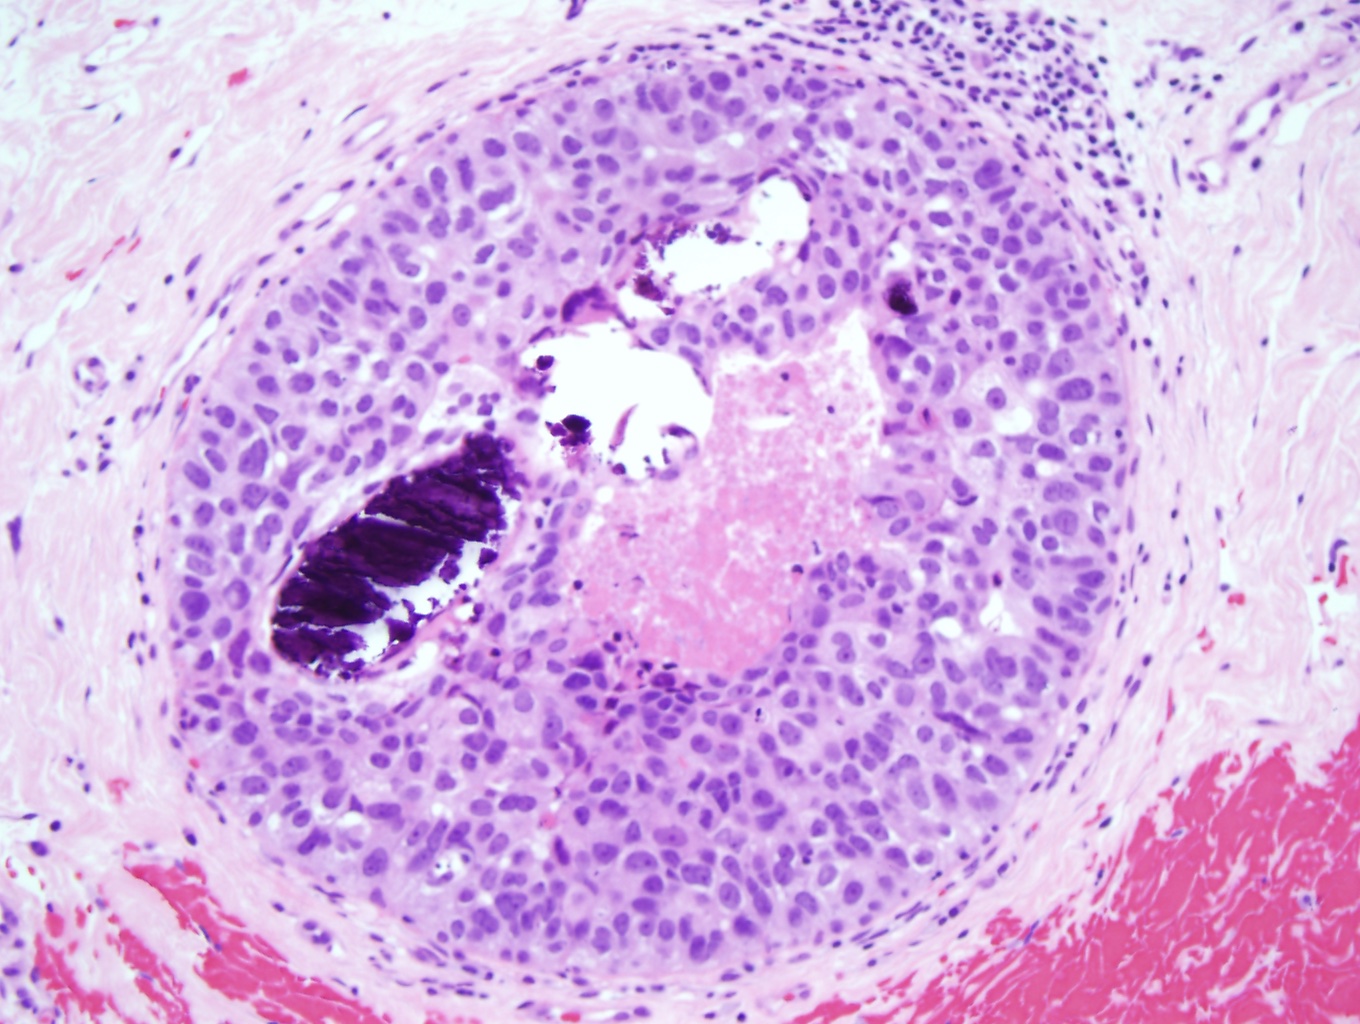 The image shows high grade ductal carcinoma (x10).  There is a proliferation of large, pleomorphic cells with prominent nucleoli. The cells are arranged in a solid pattern with comedo necrosis and calcifications. The cellular proliferation does not breach the myoepithelial cell layer, maintaining its in situ nature. 